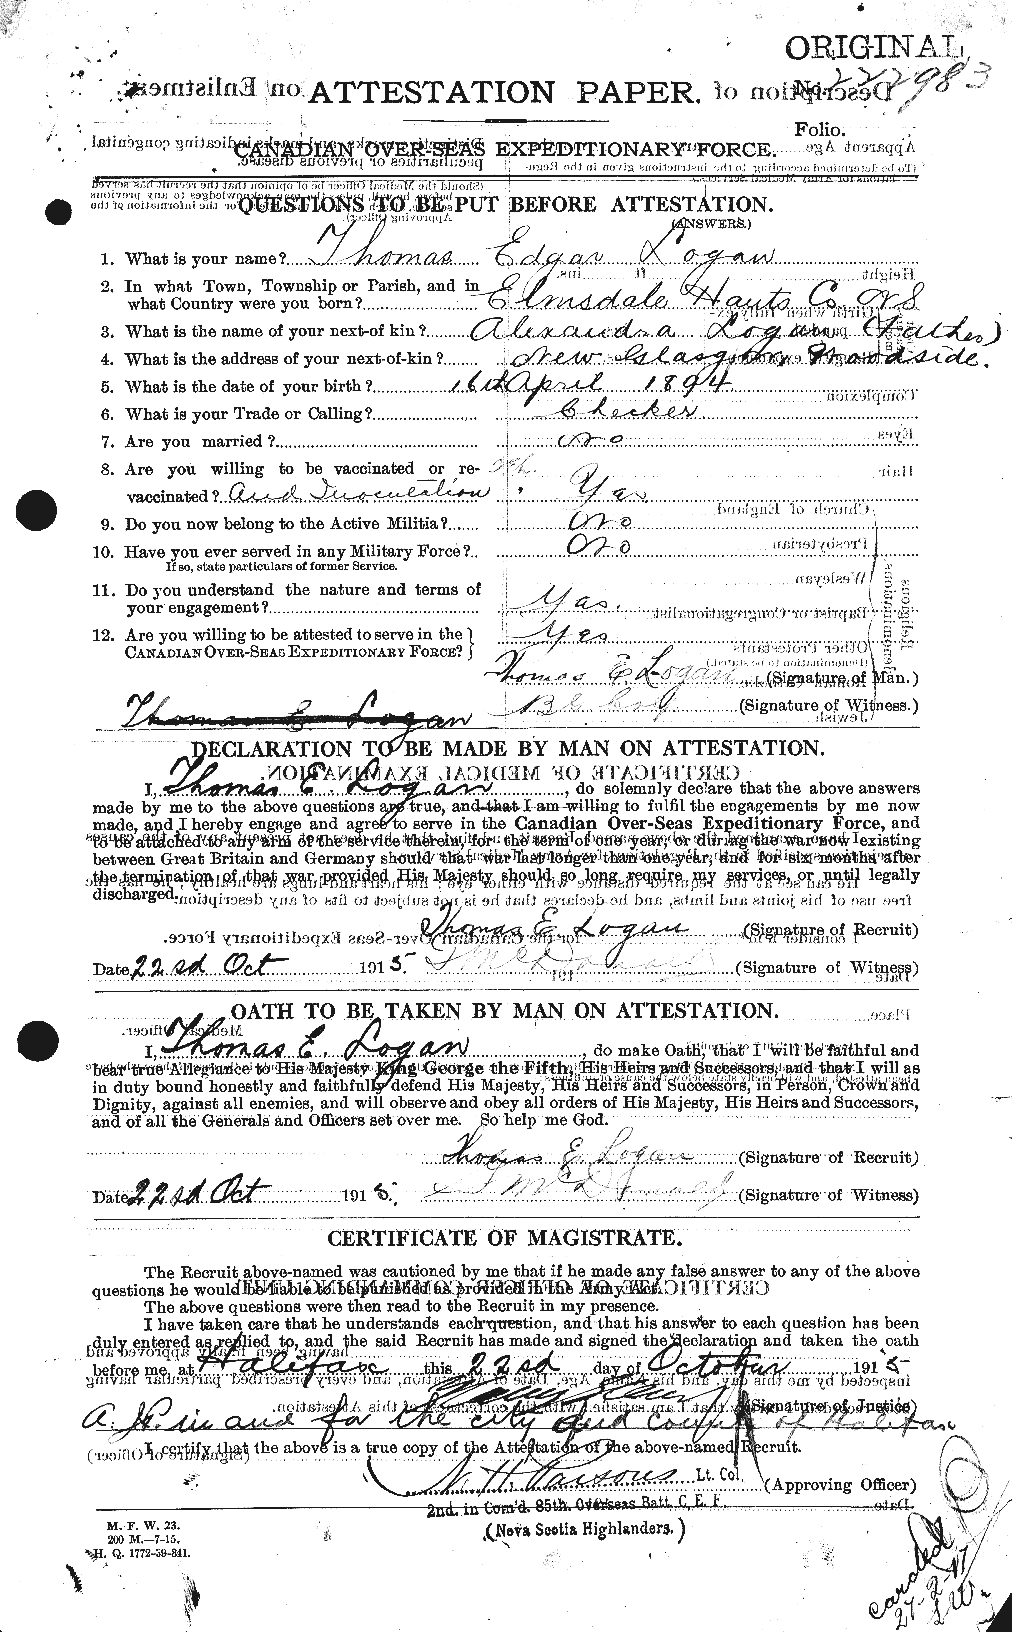 Personnel Records of the First World War - CEF 461821a